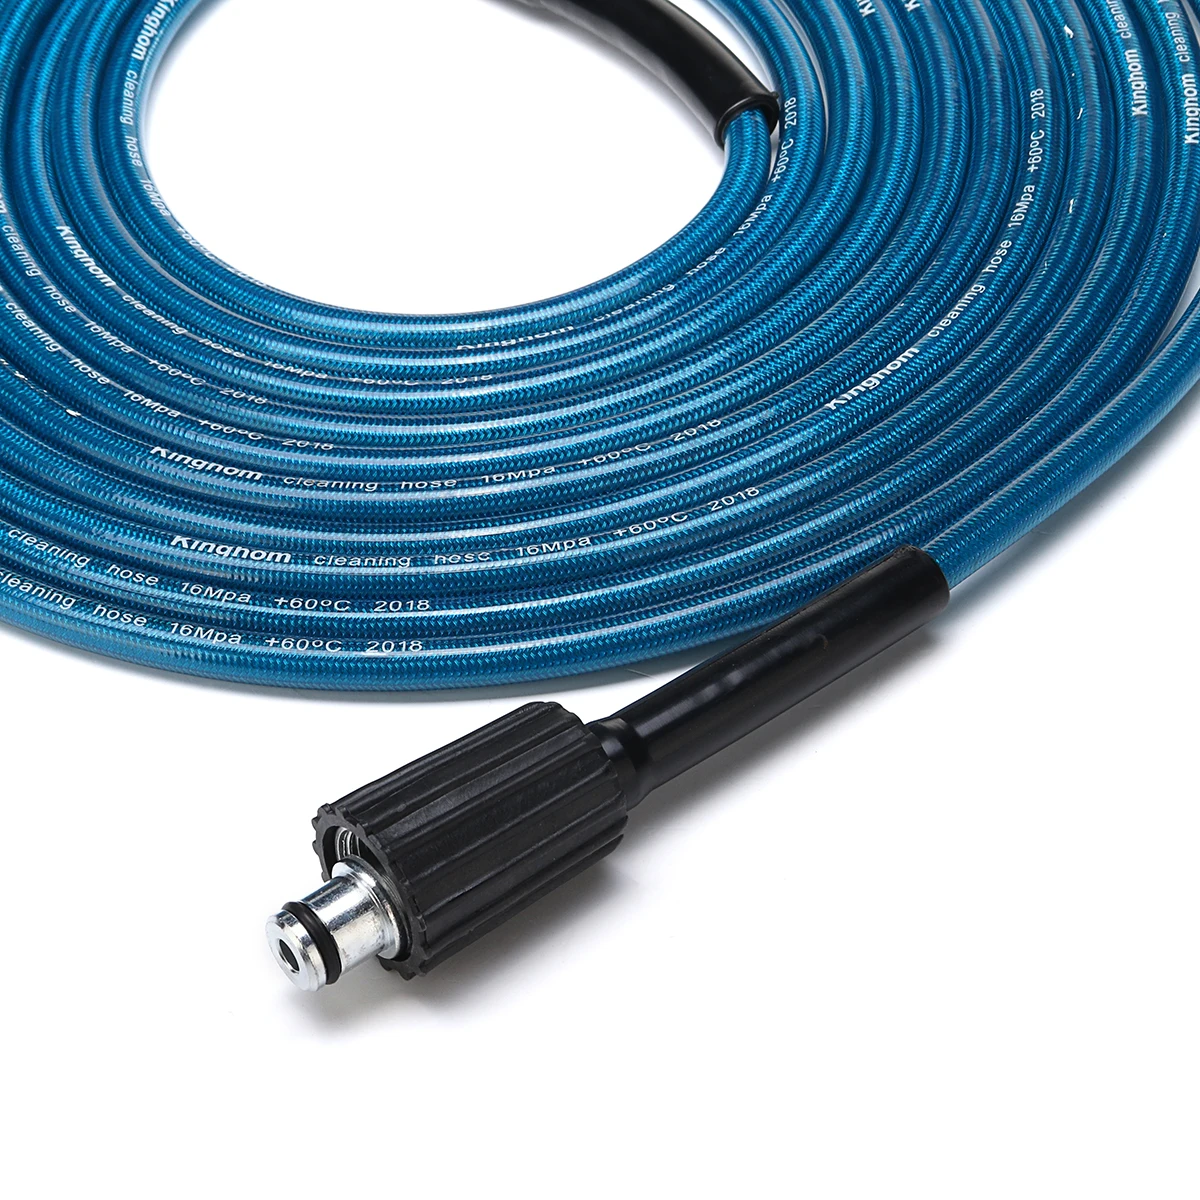 8M 26FT 2320PSI High Pressure Washer Hose Tube Water Cleaning Hose Replacement